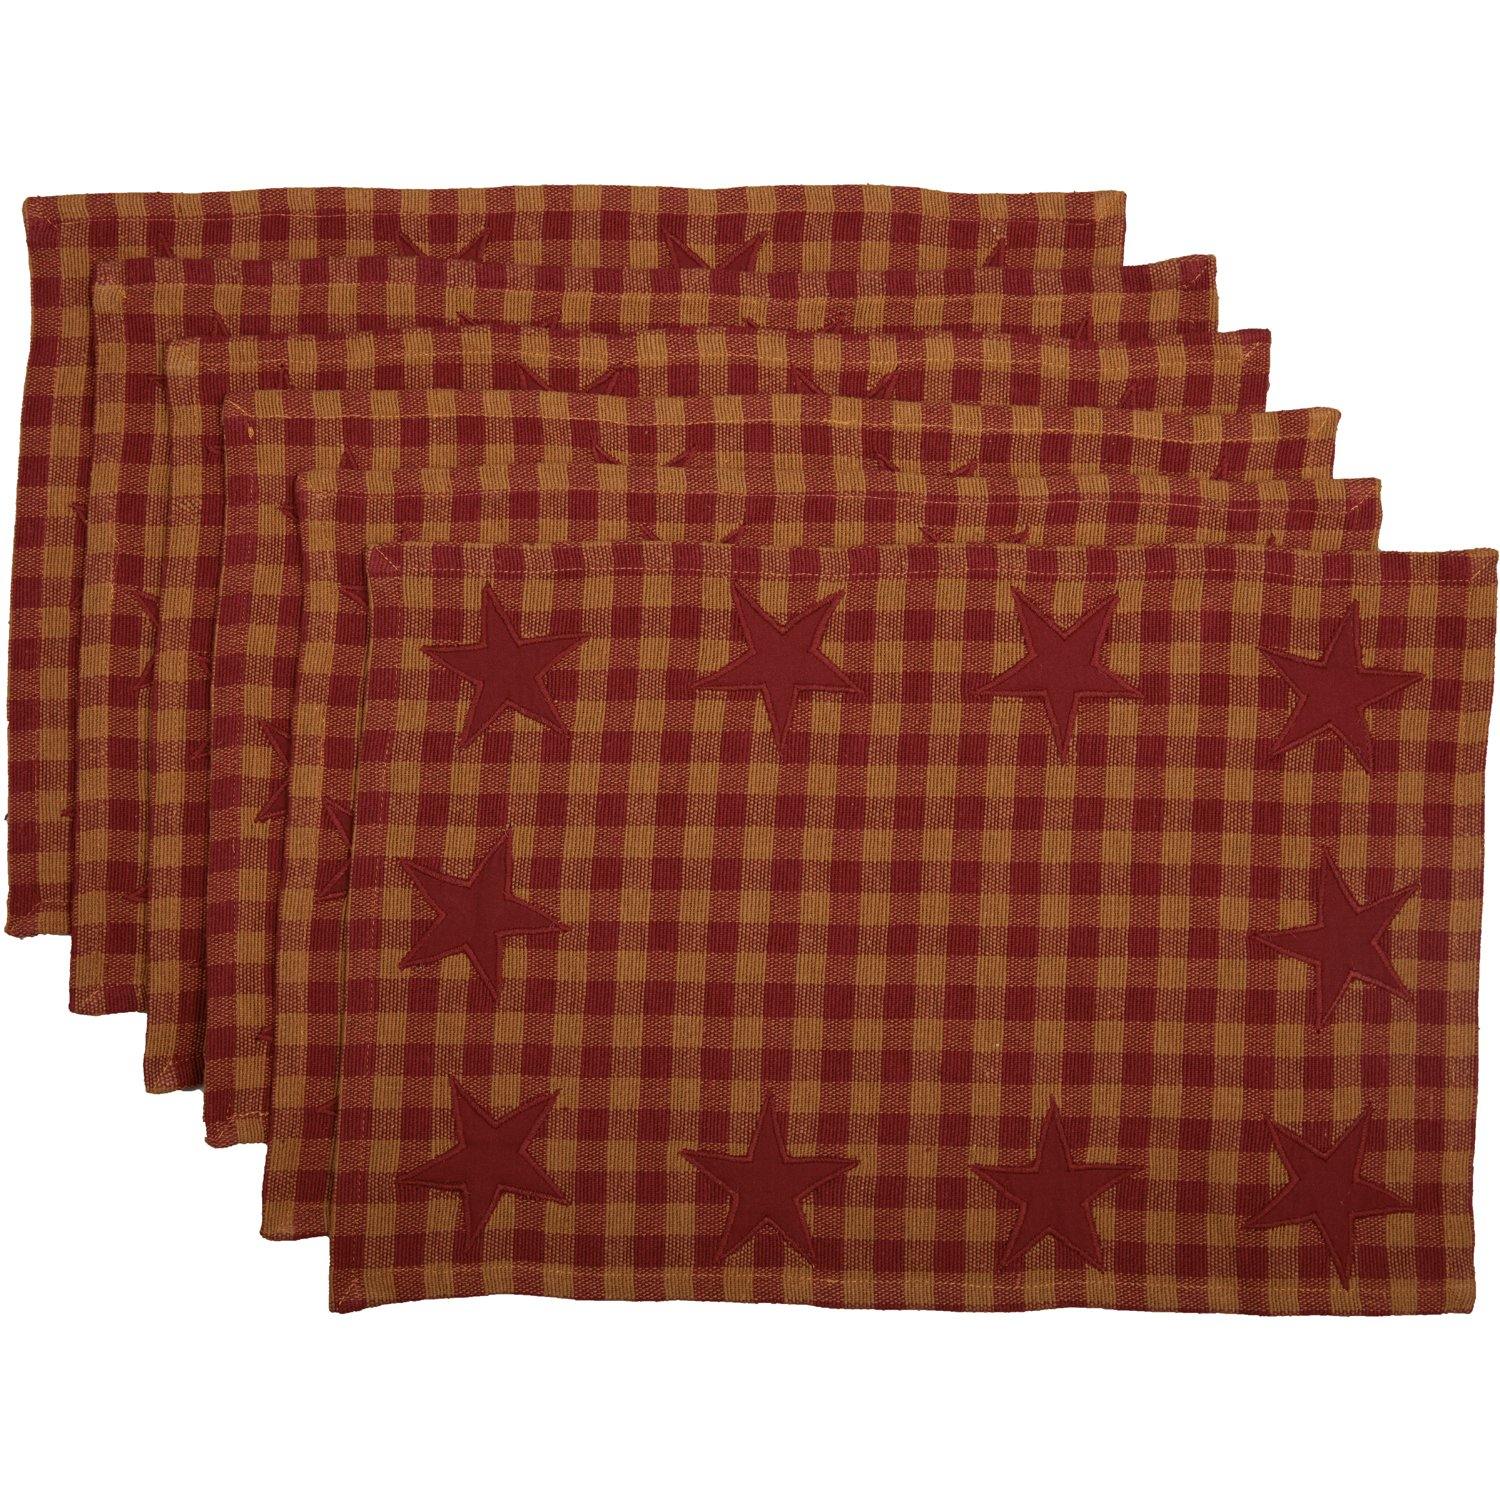 Burgundy Star Placemat Set of 6 VHC Brands - The Fox Decor